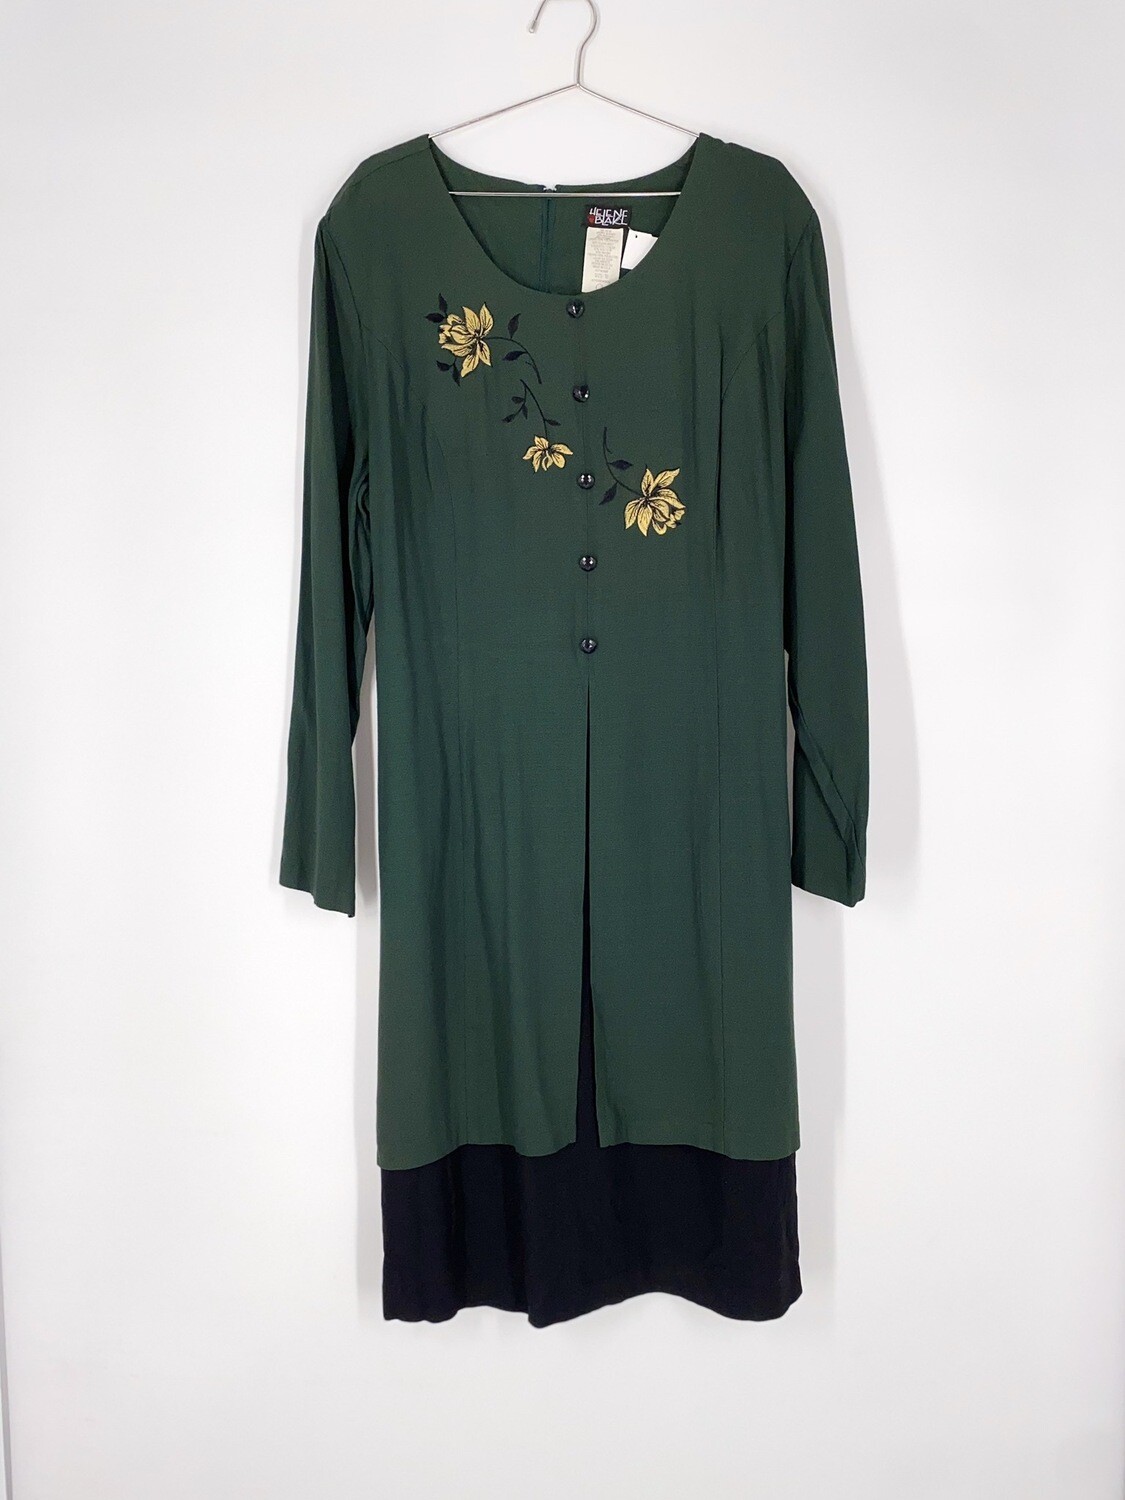 Floral Embroidered Tie Back Dress Size XL